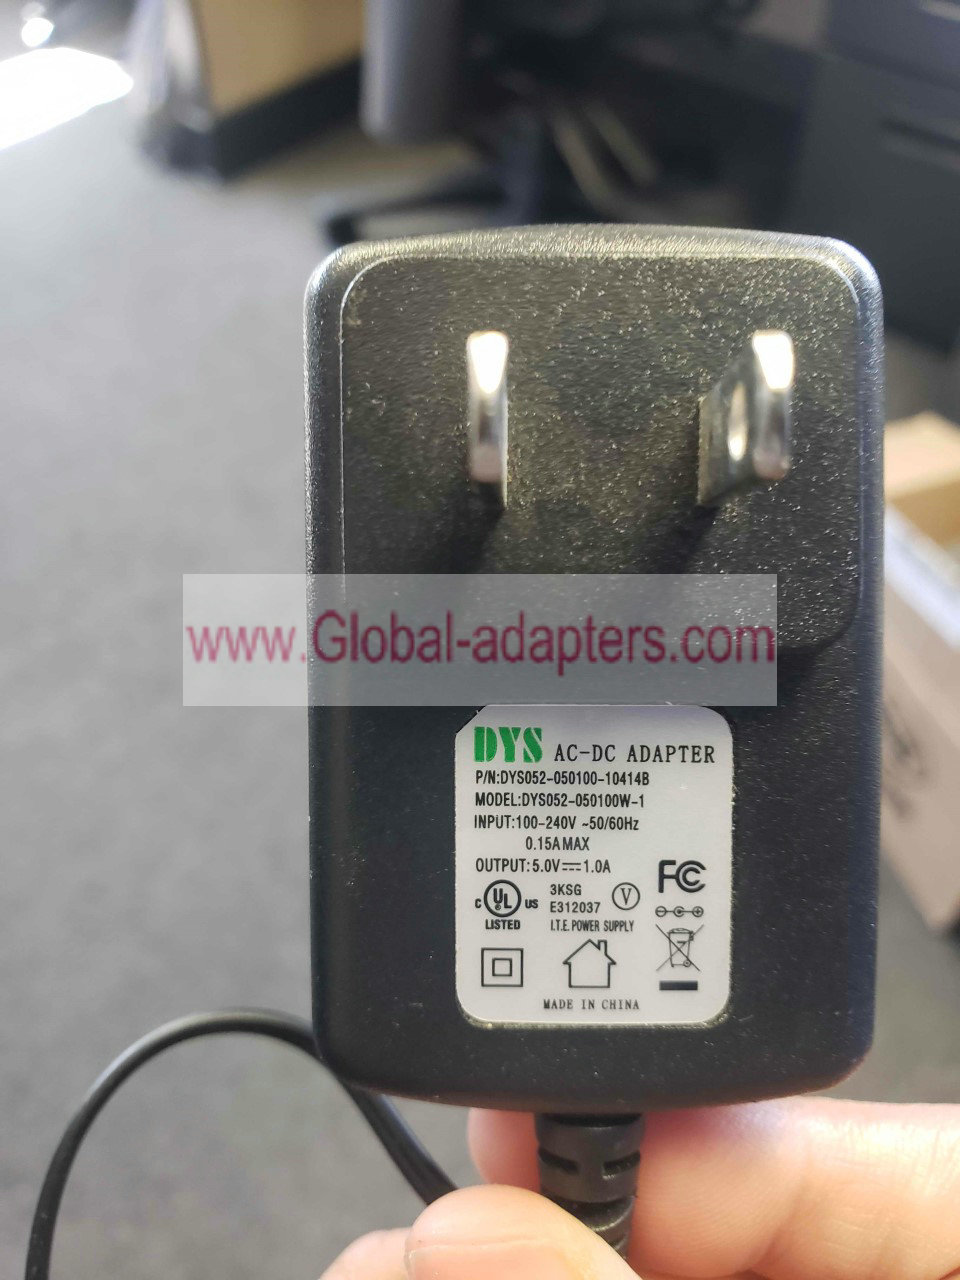 New DYS DYS052-050100W-1 DYS052-050100-104148 AC-DC ADAPTER Power Adapter 5.0V 1.0A - Click Image to Close